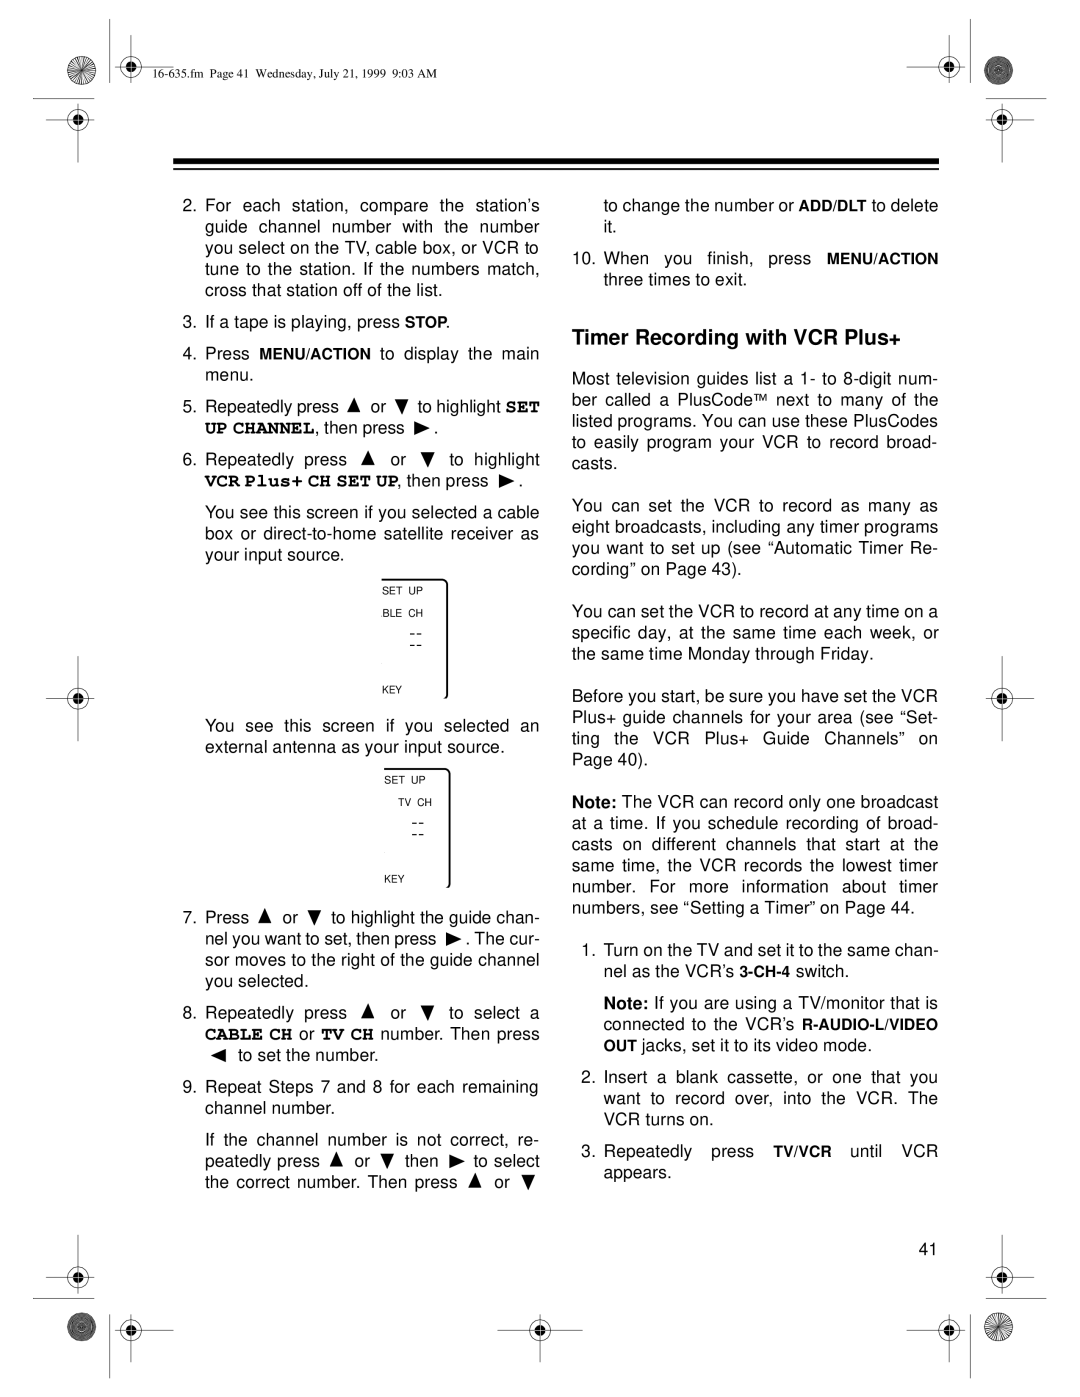 Radio Shack 66 owner manual Timer Recording with VCR Plus+, VCR Plus+ CH SET UP, then press 